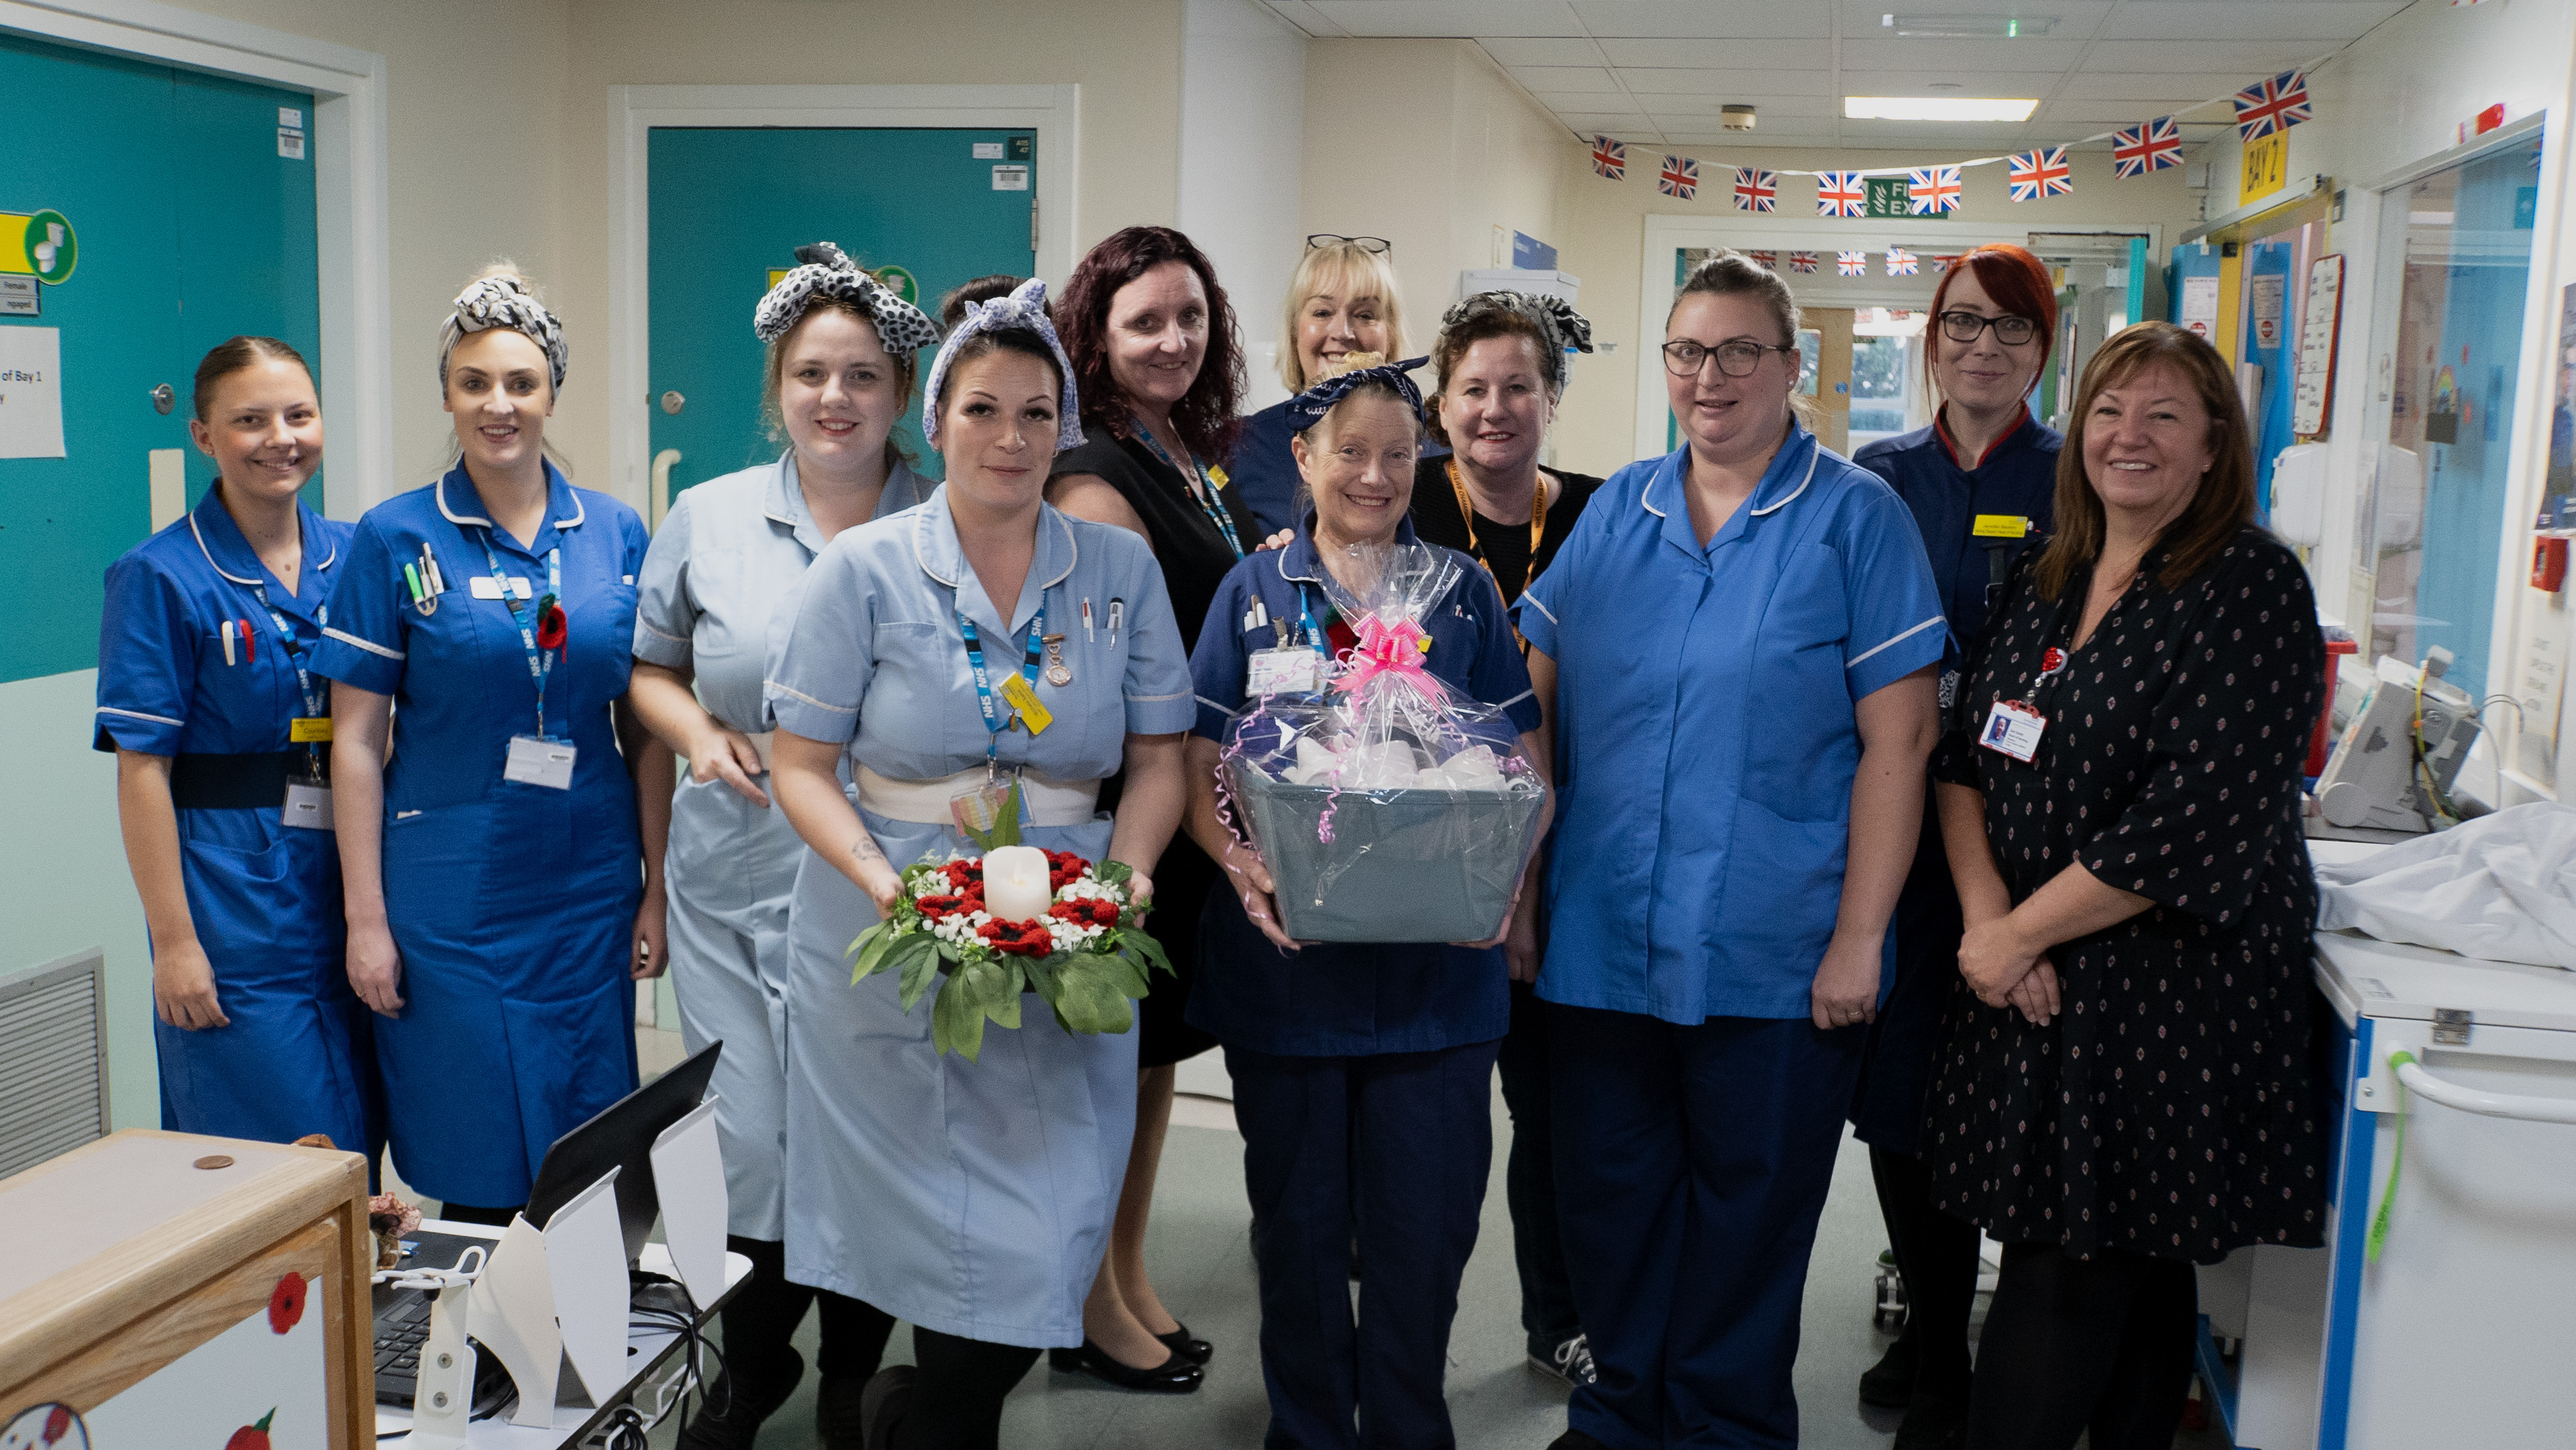 Ward A3 being awarded the winning hamper